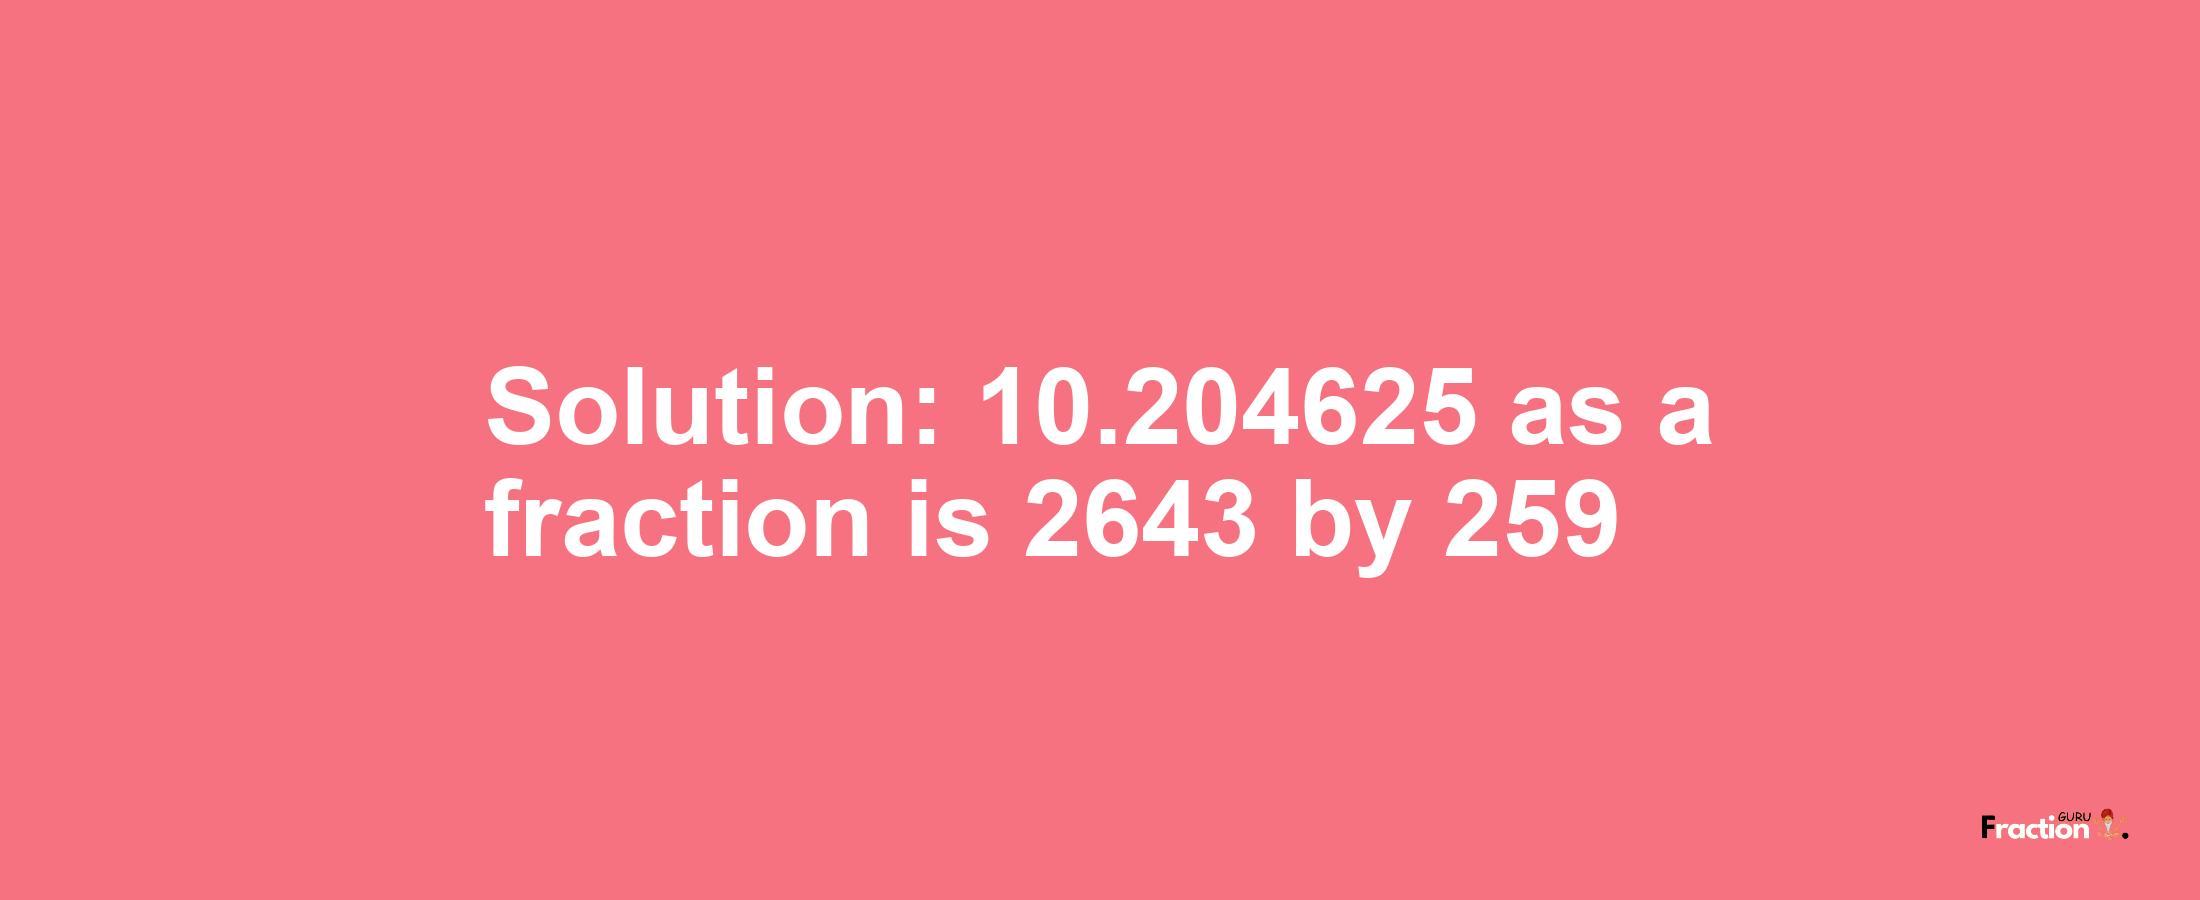 Solution:10.204625 as a fraction is 2643/259